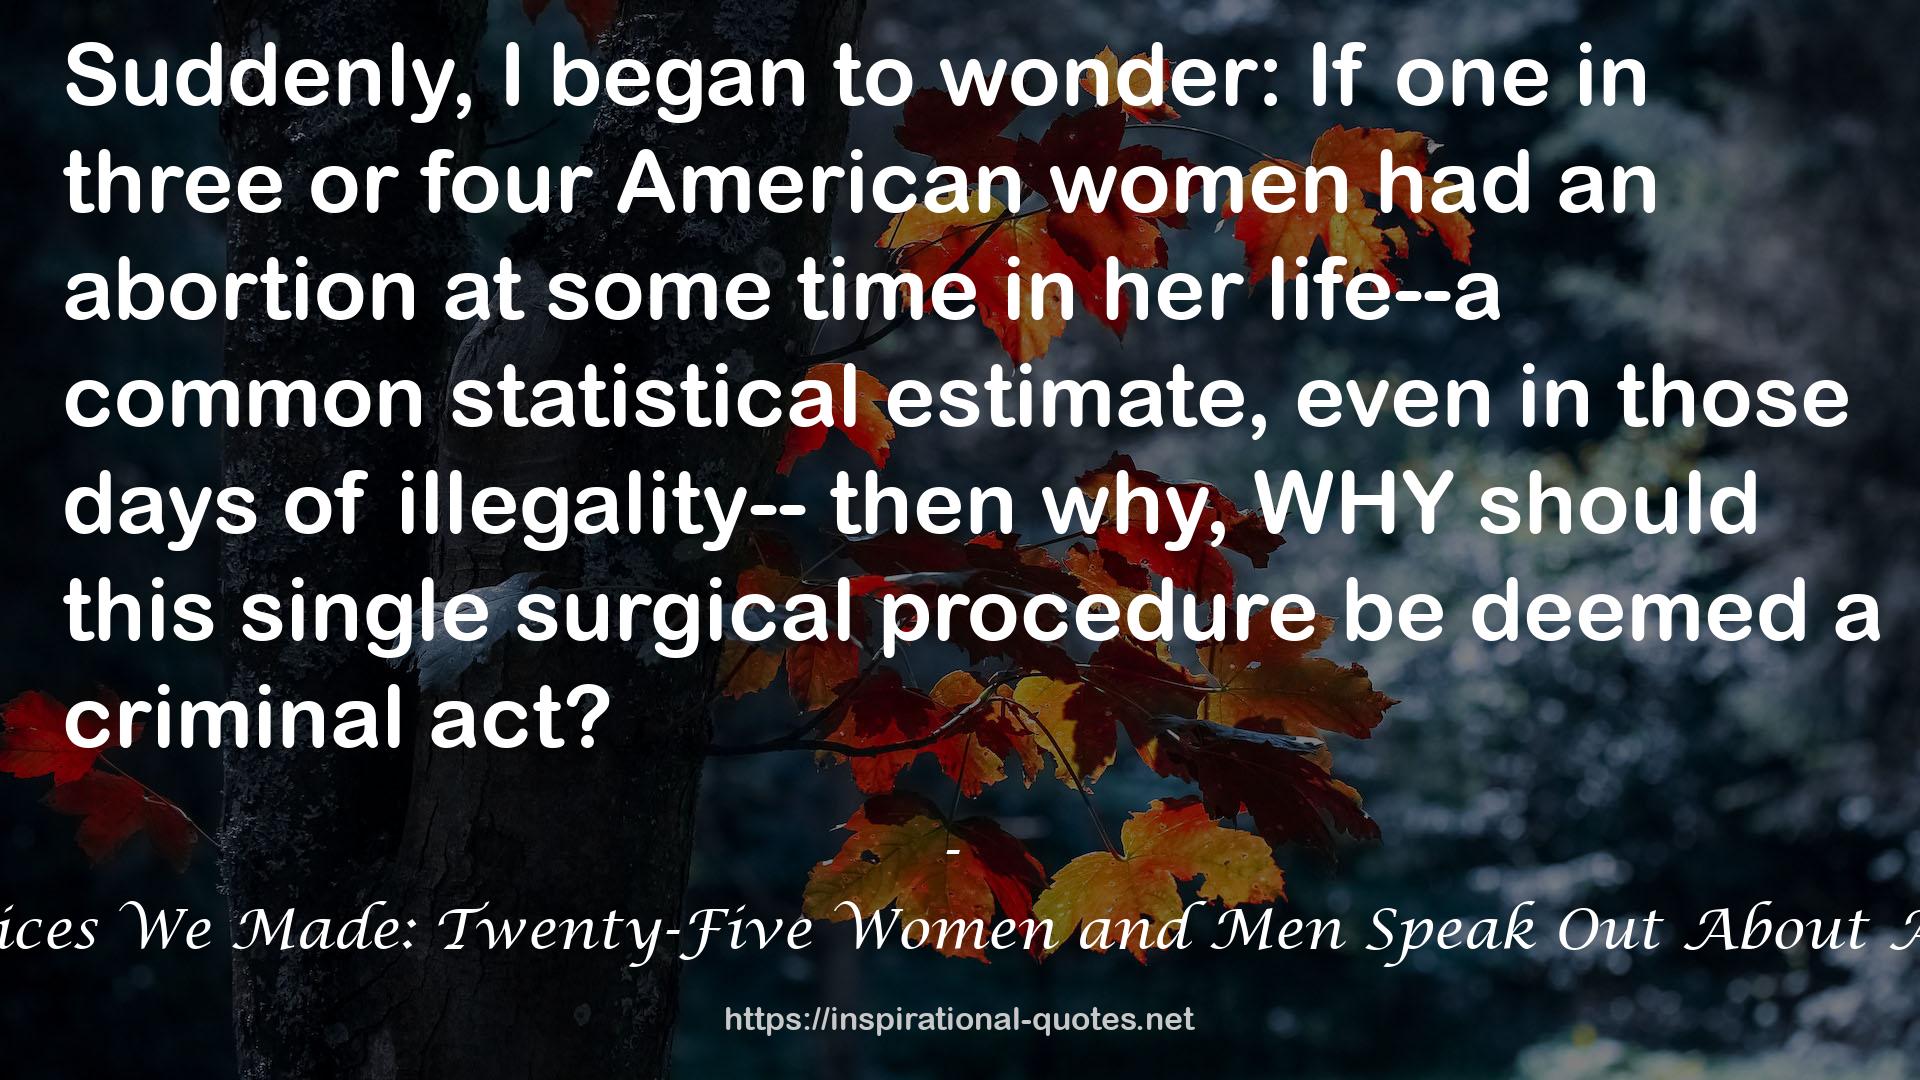 The Choices We Made: Twenty-Five Women and Men Speak Out About Abortion QUOTES